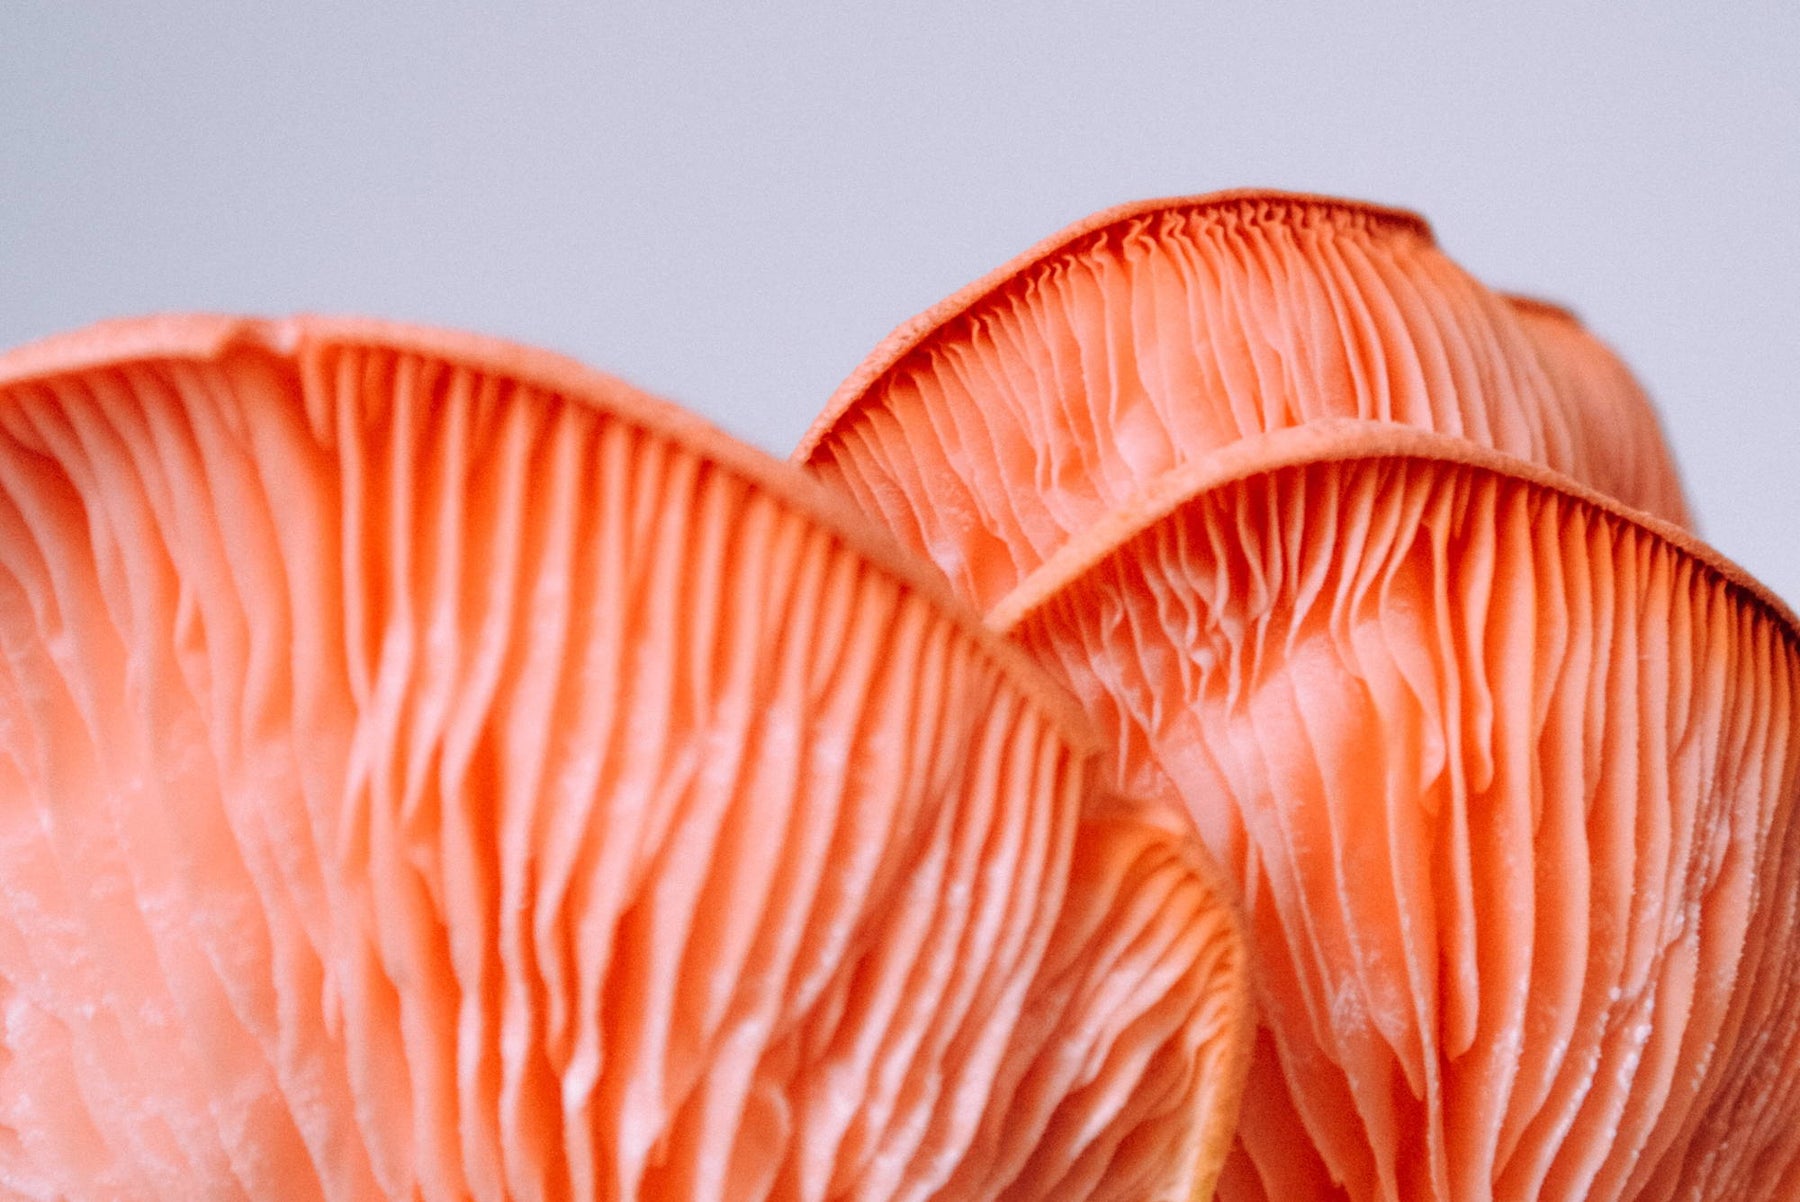 6 Mushrooms That Will Turbo-Charge Your Immune System